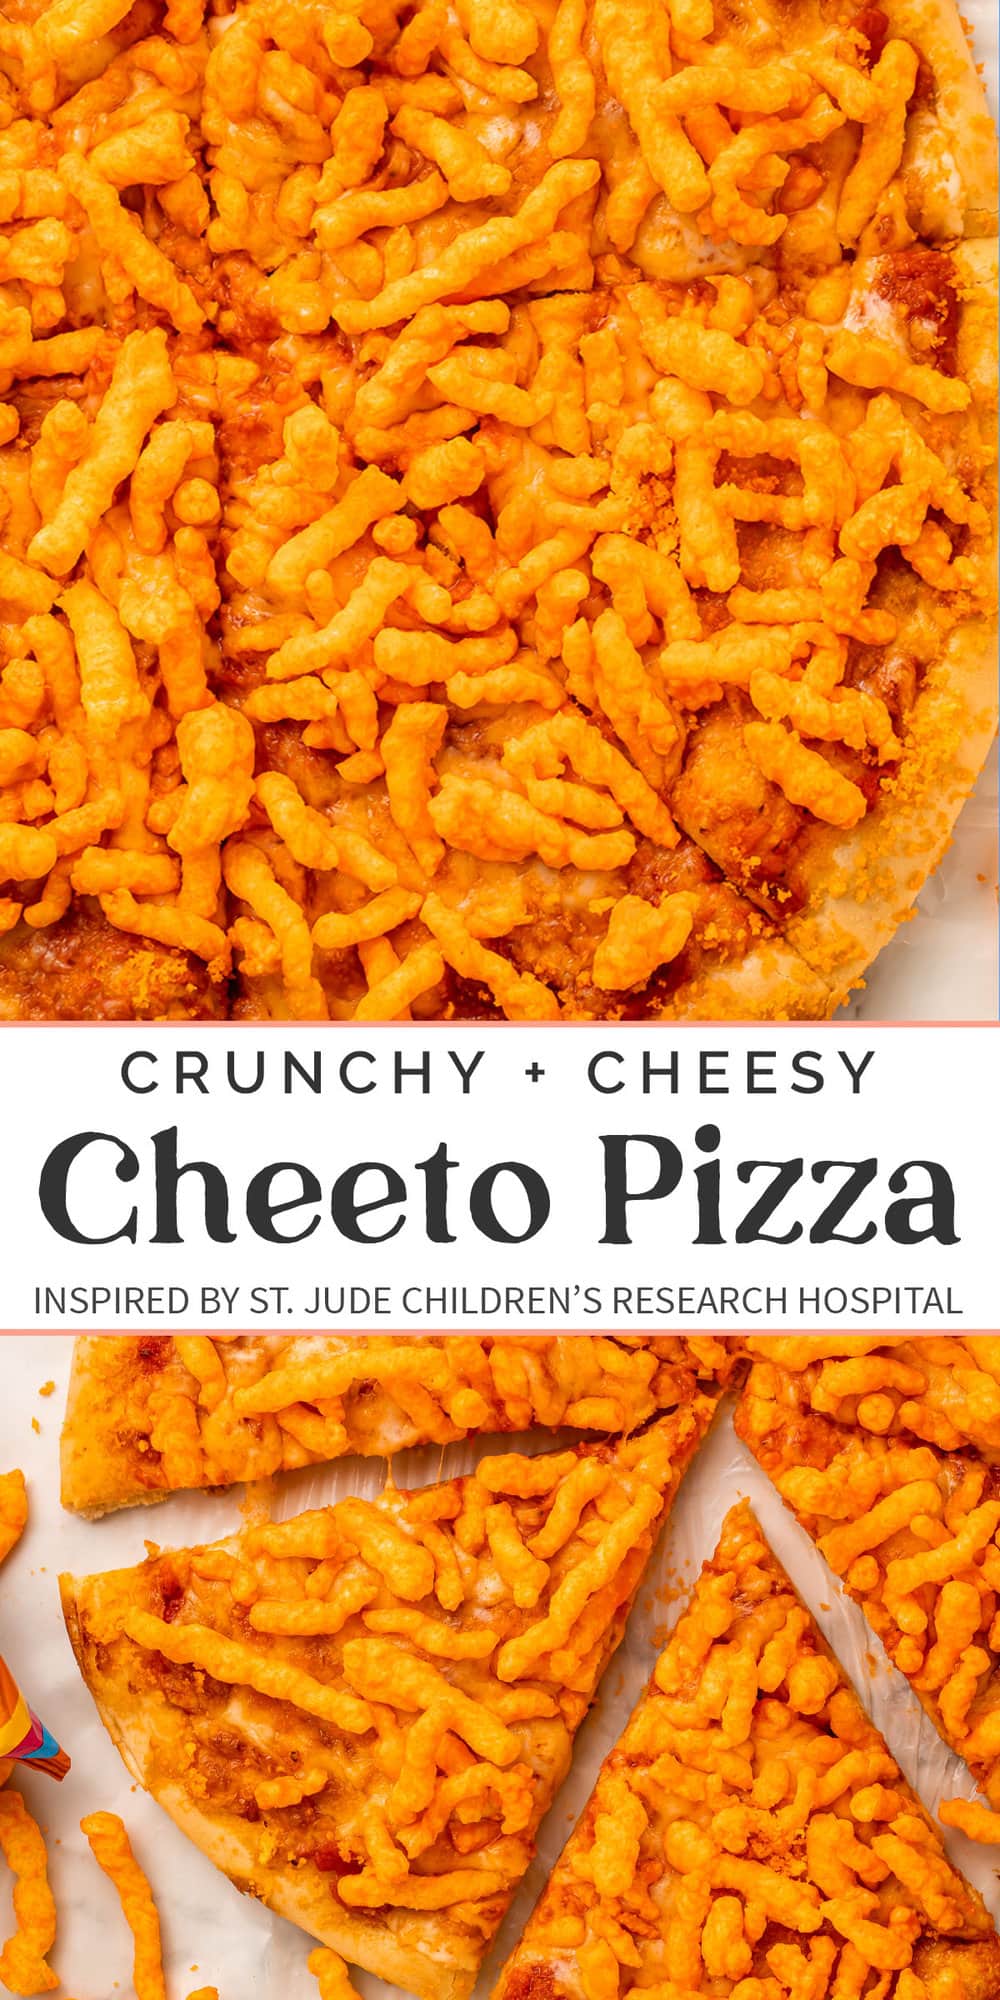 Pin graphic for cheeto pizza.